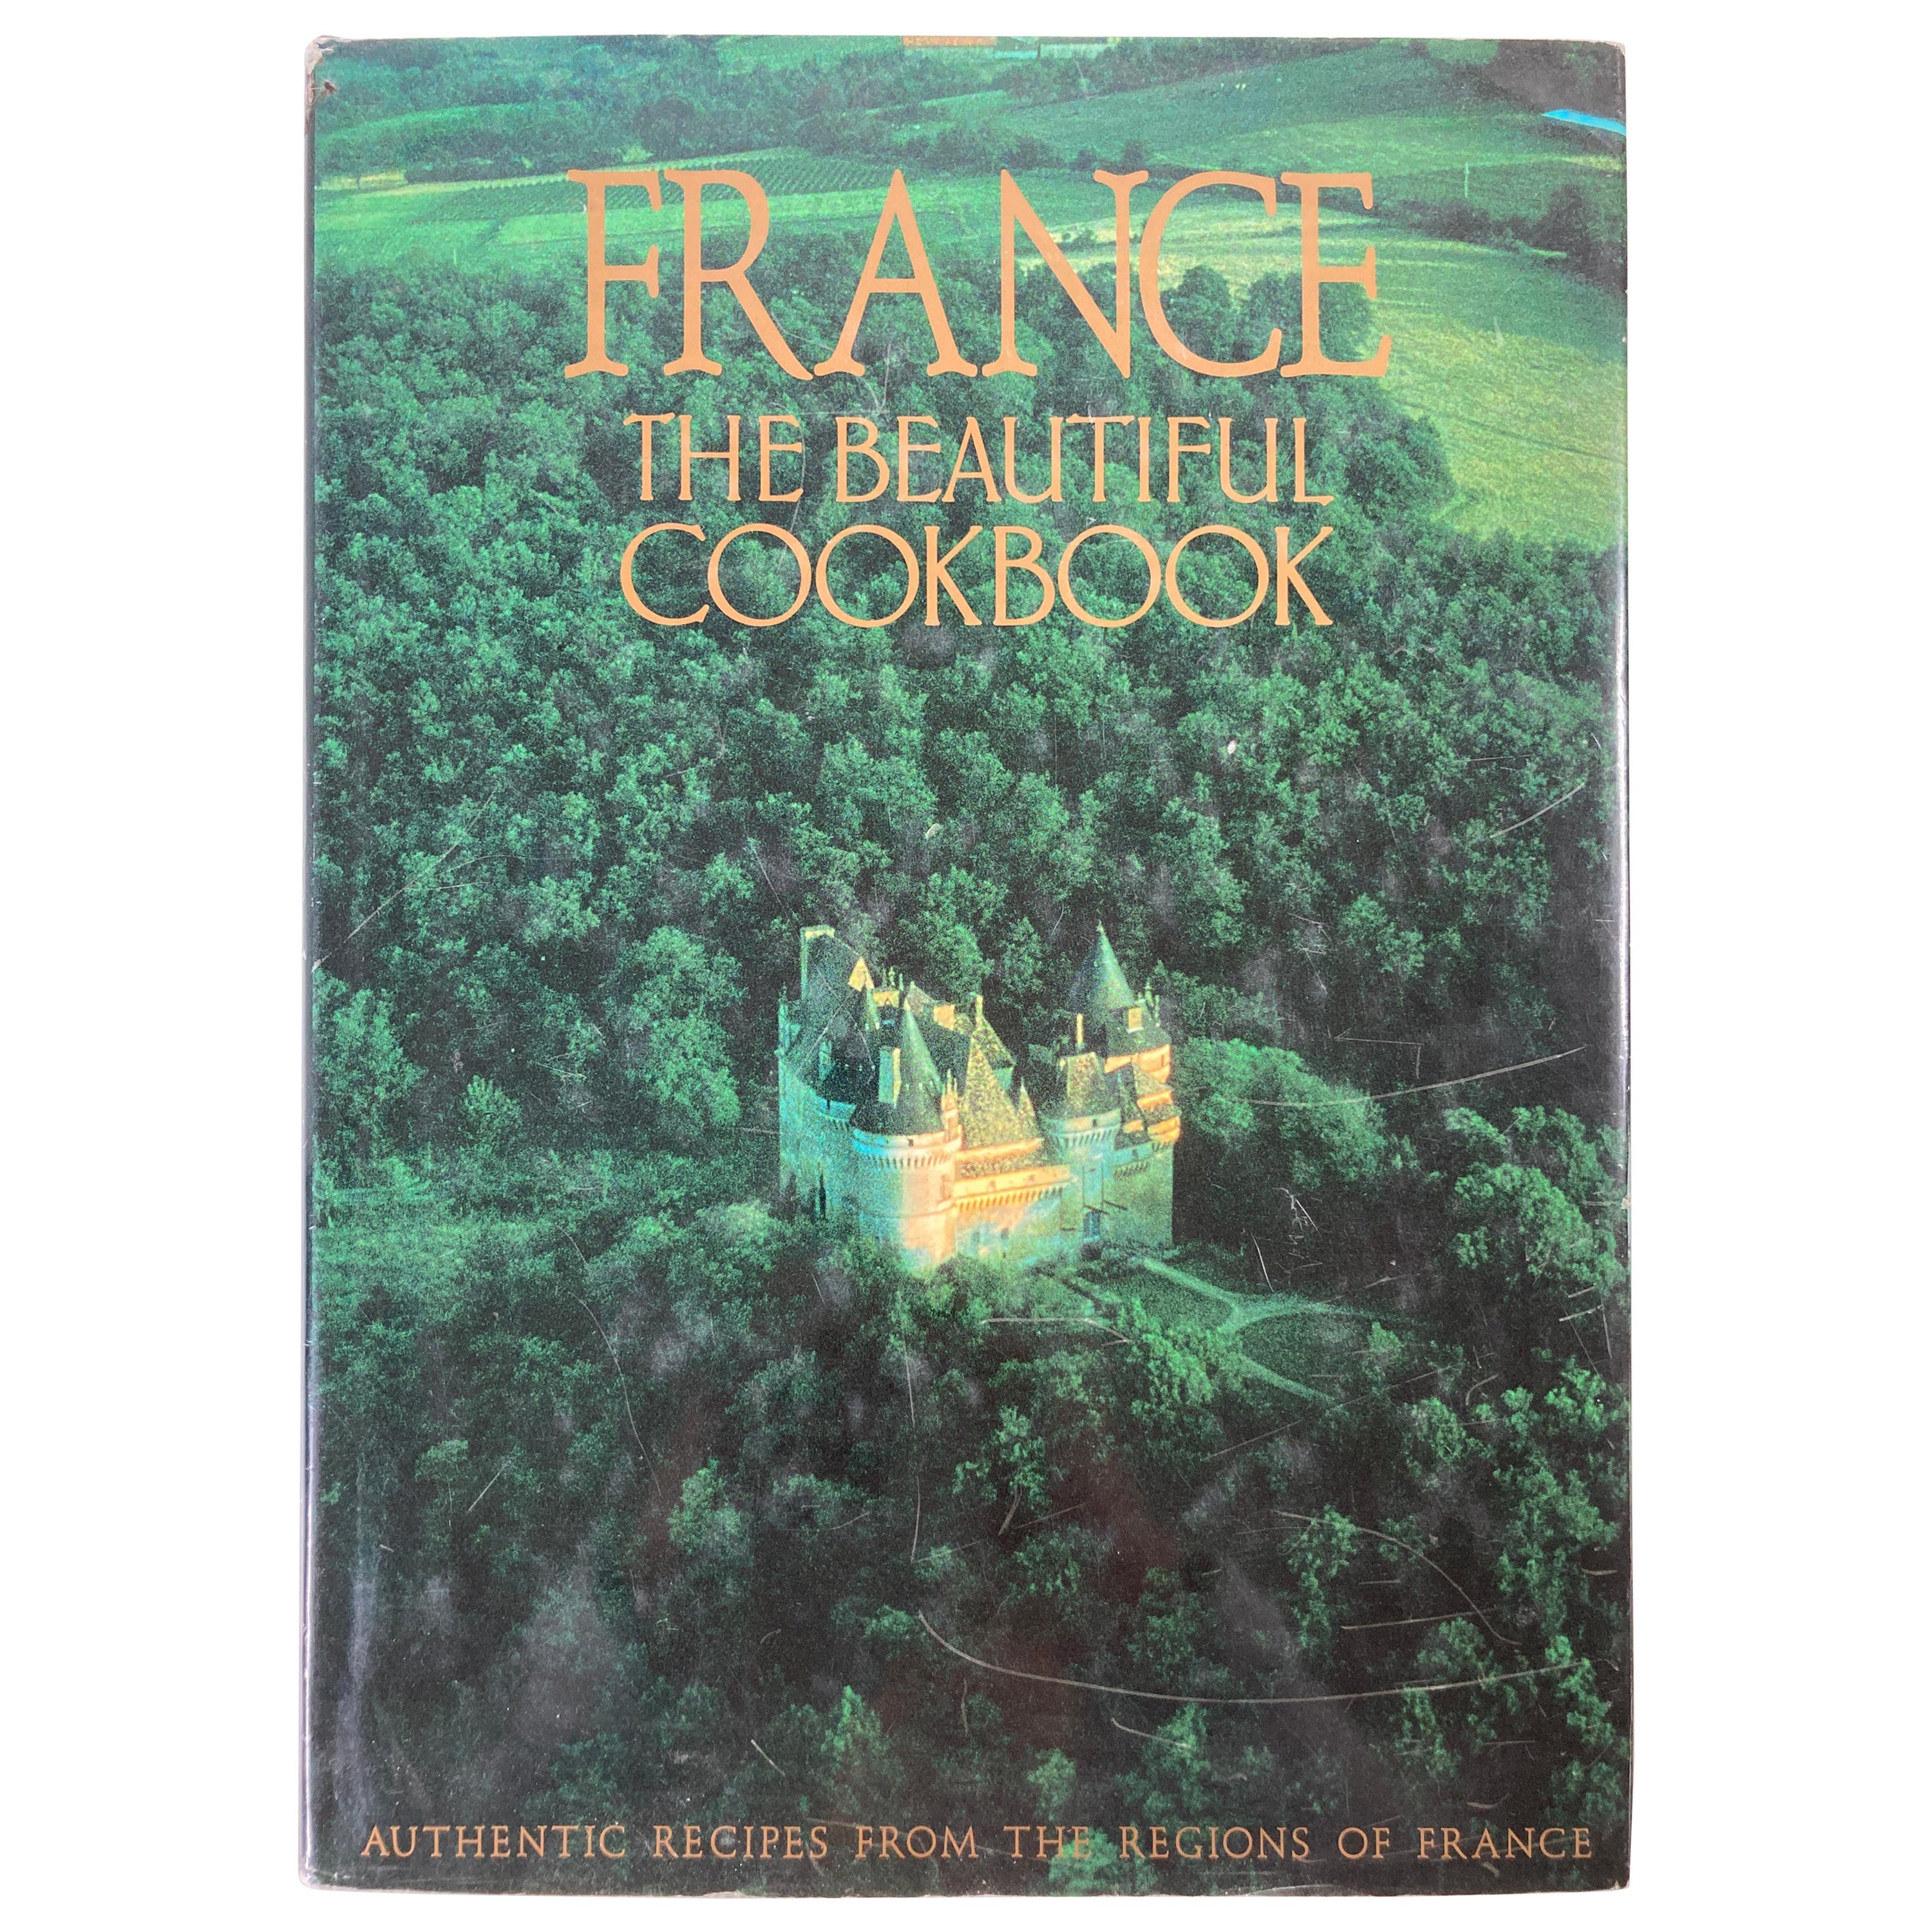 France The Beautiful Cookbook by the Scotto Sisters, French Recipes